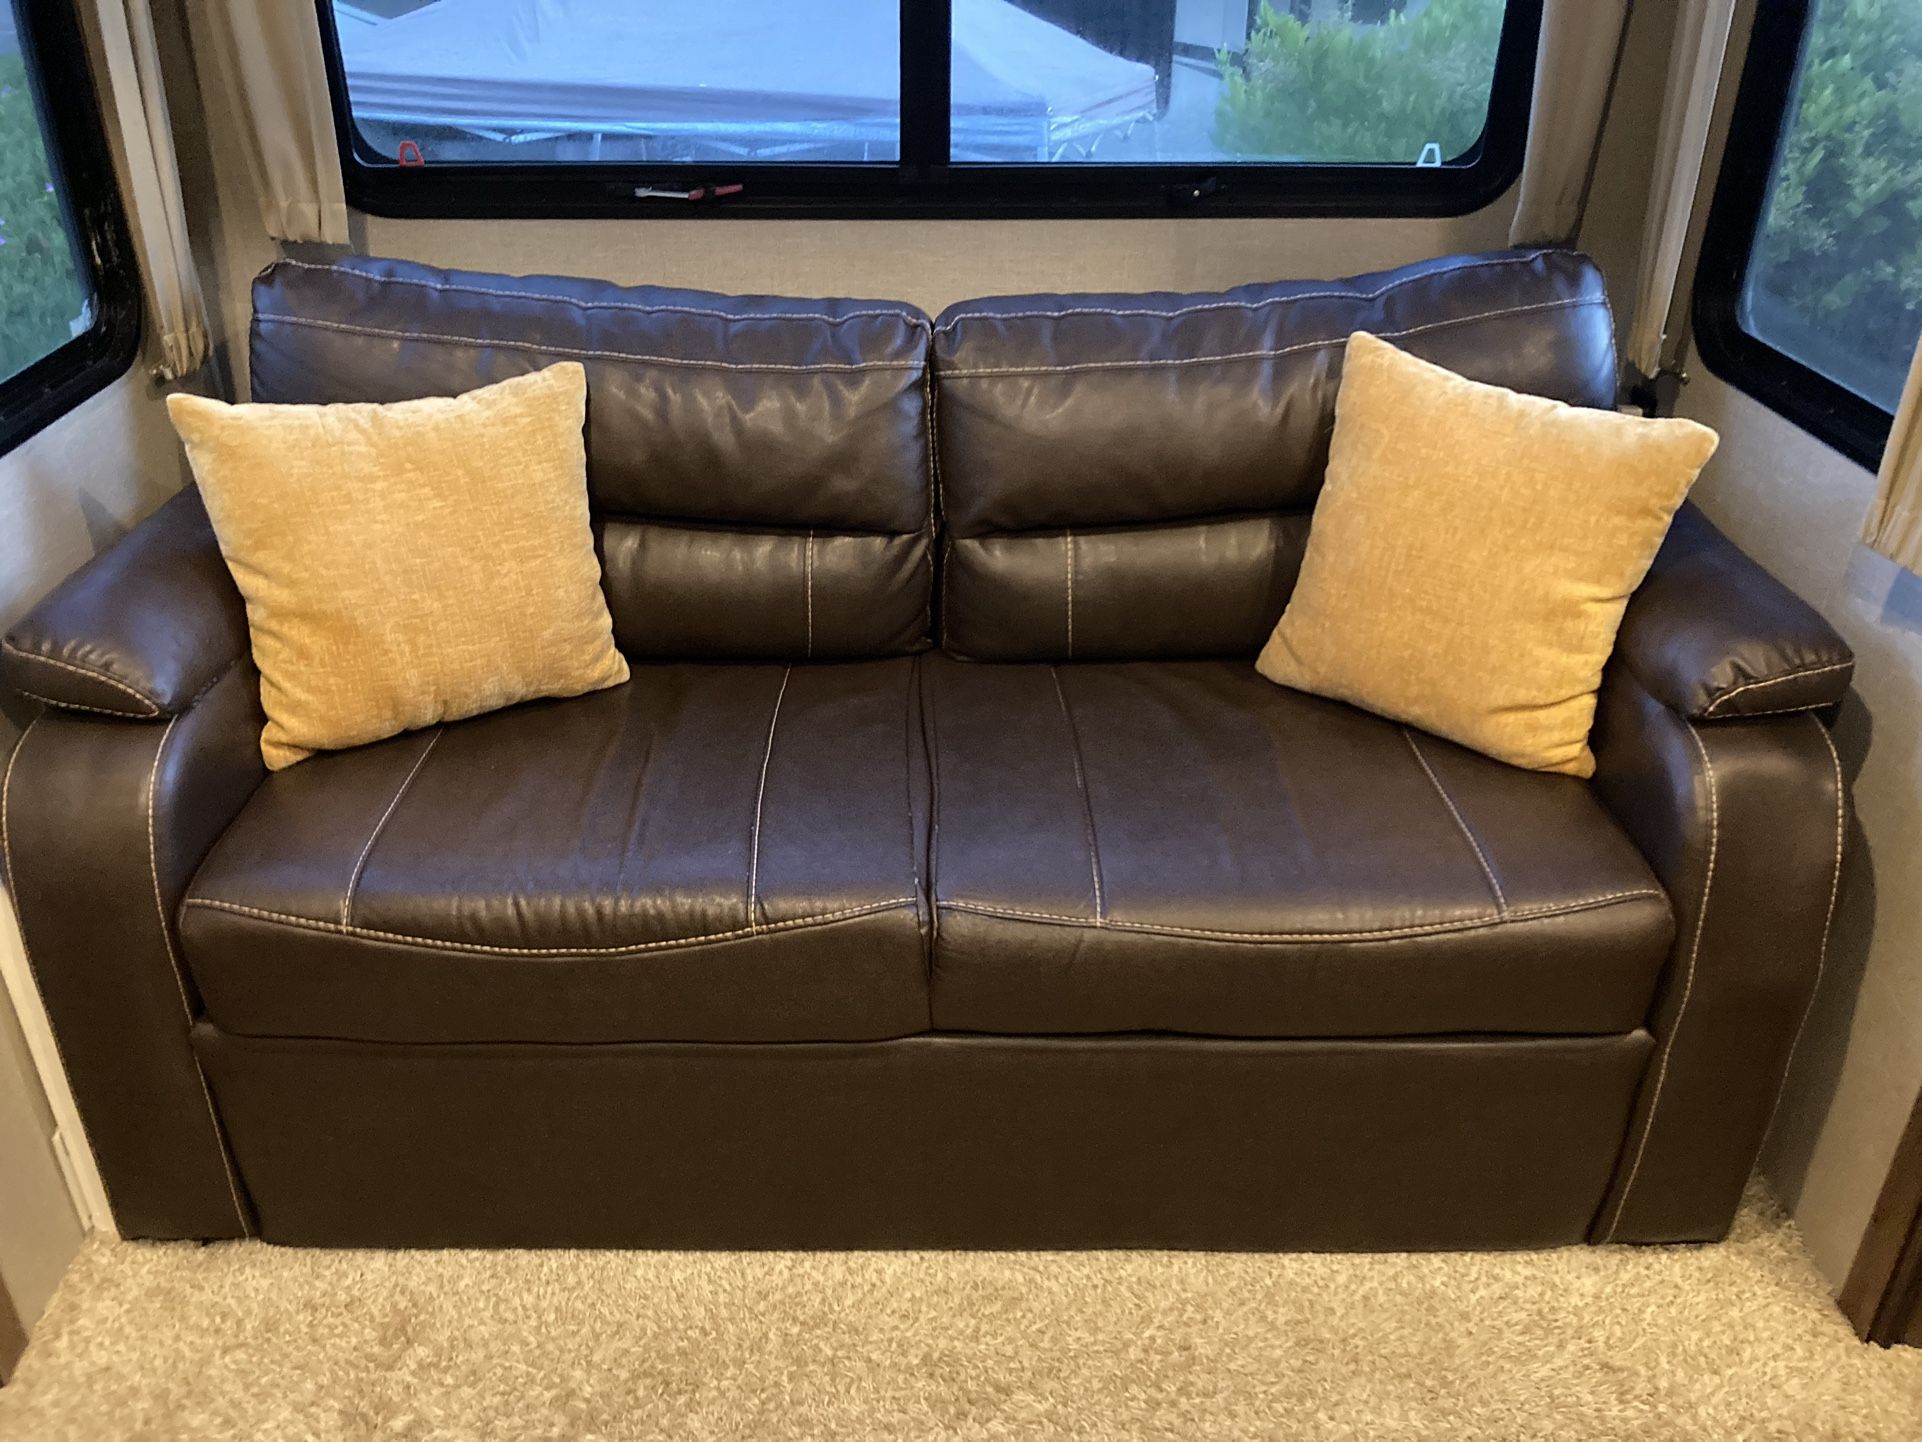 Three Couch Set (x2 Full Beds, x1 Electric Loveseat)